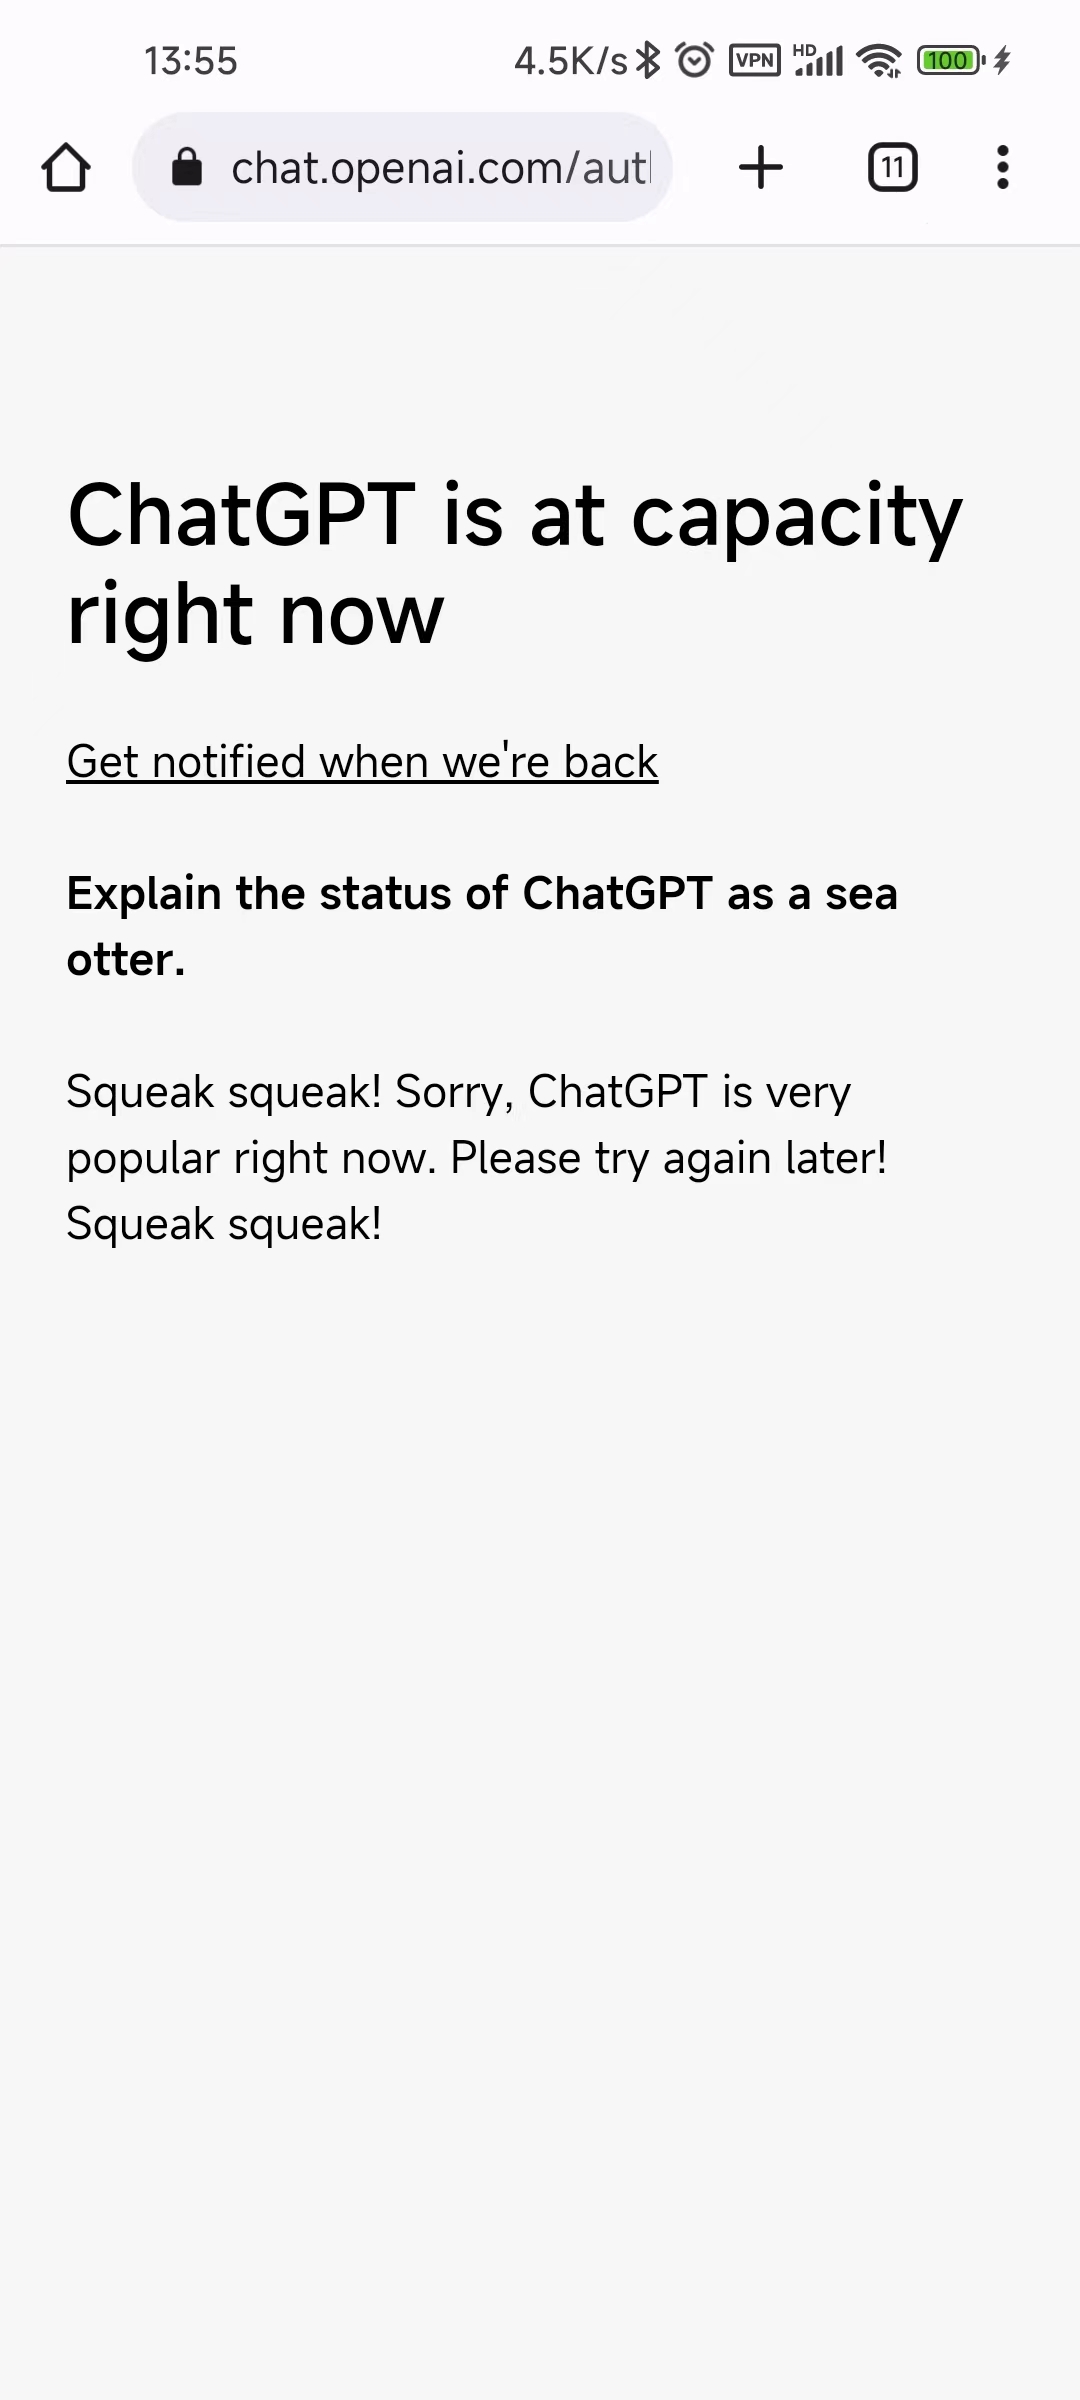 chatgpt at capacity right now